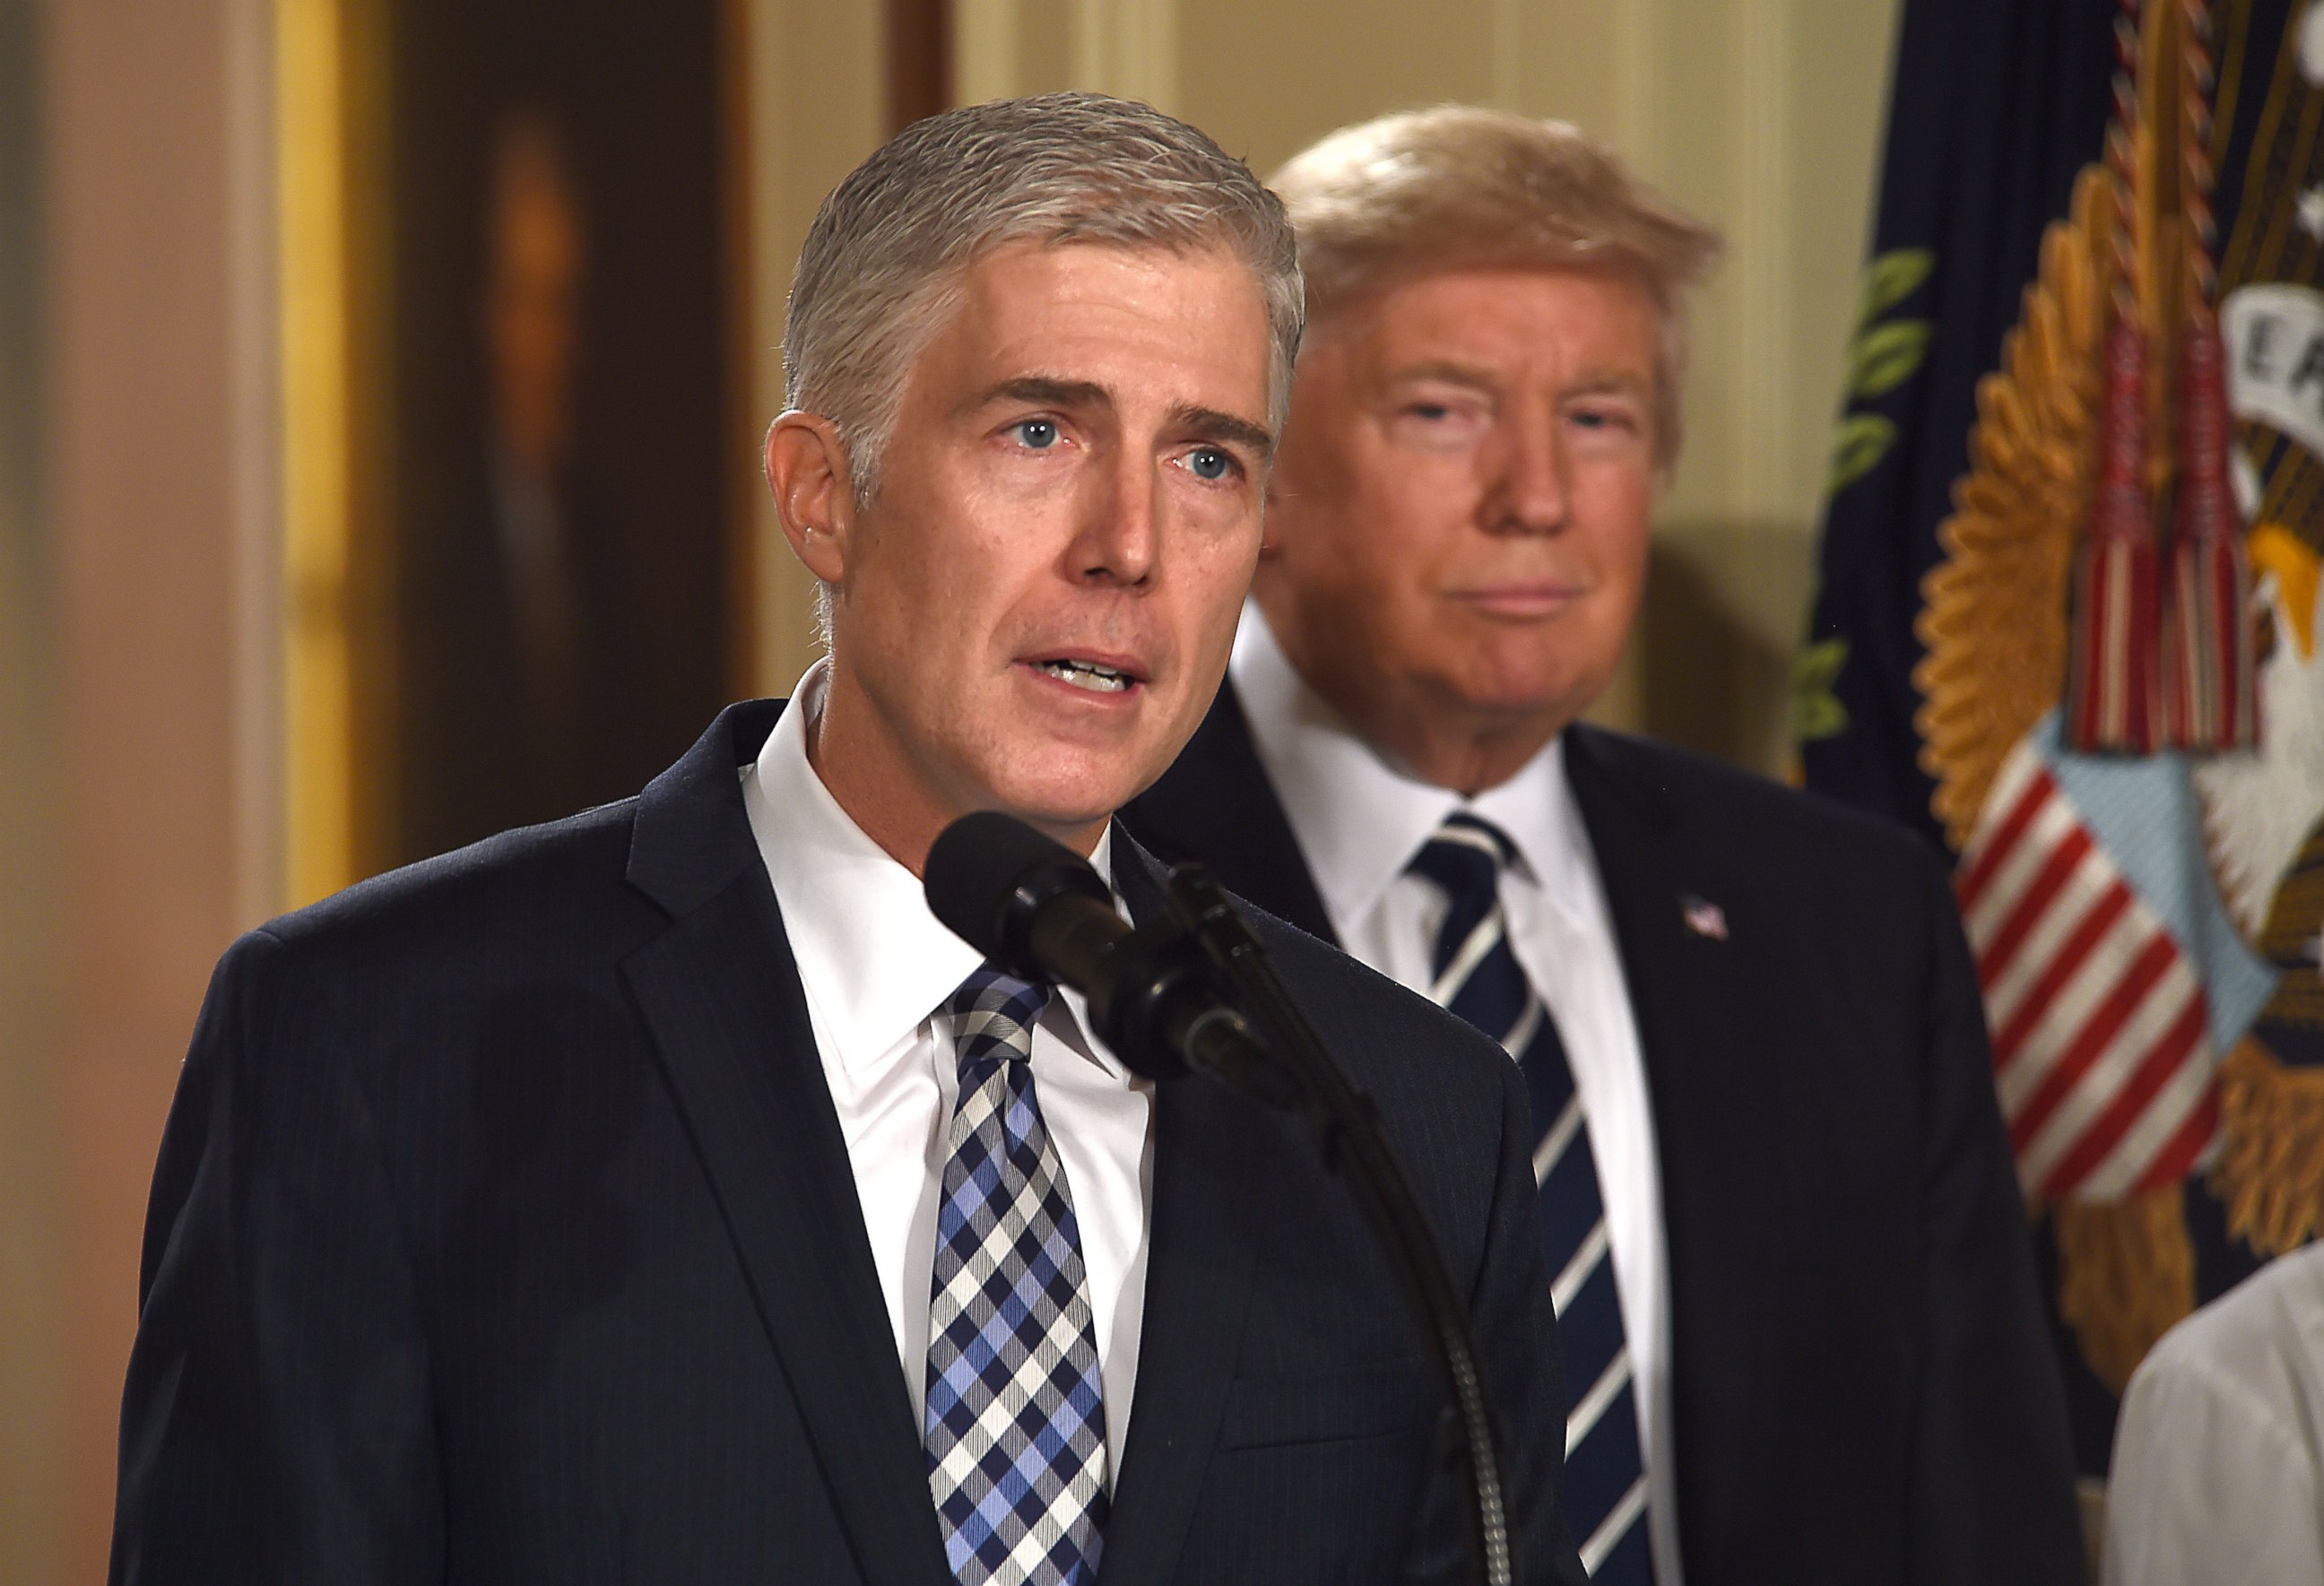 PHOTO: Judge Neil Gorsuch speaking in the East room of the White House after being nominated by President Trump for the vacant seat at the US Supreme Court, Jan. 31, 2017. 